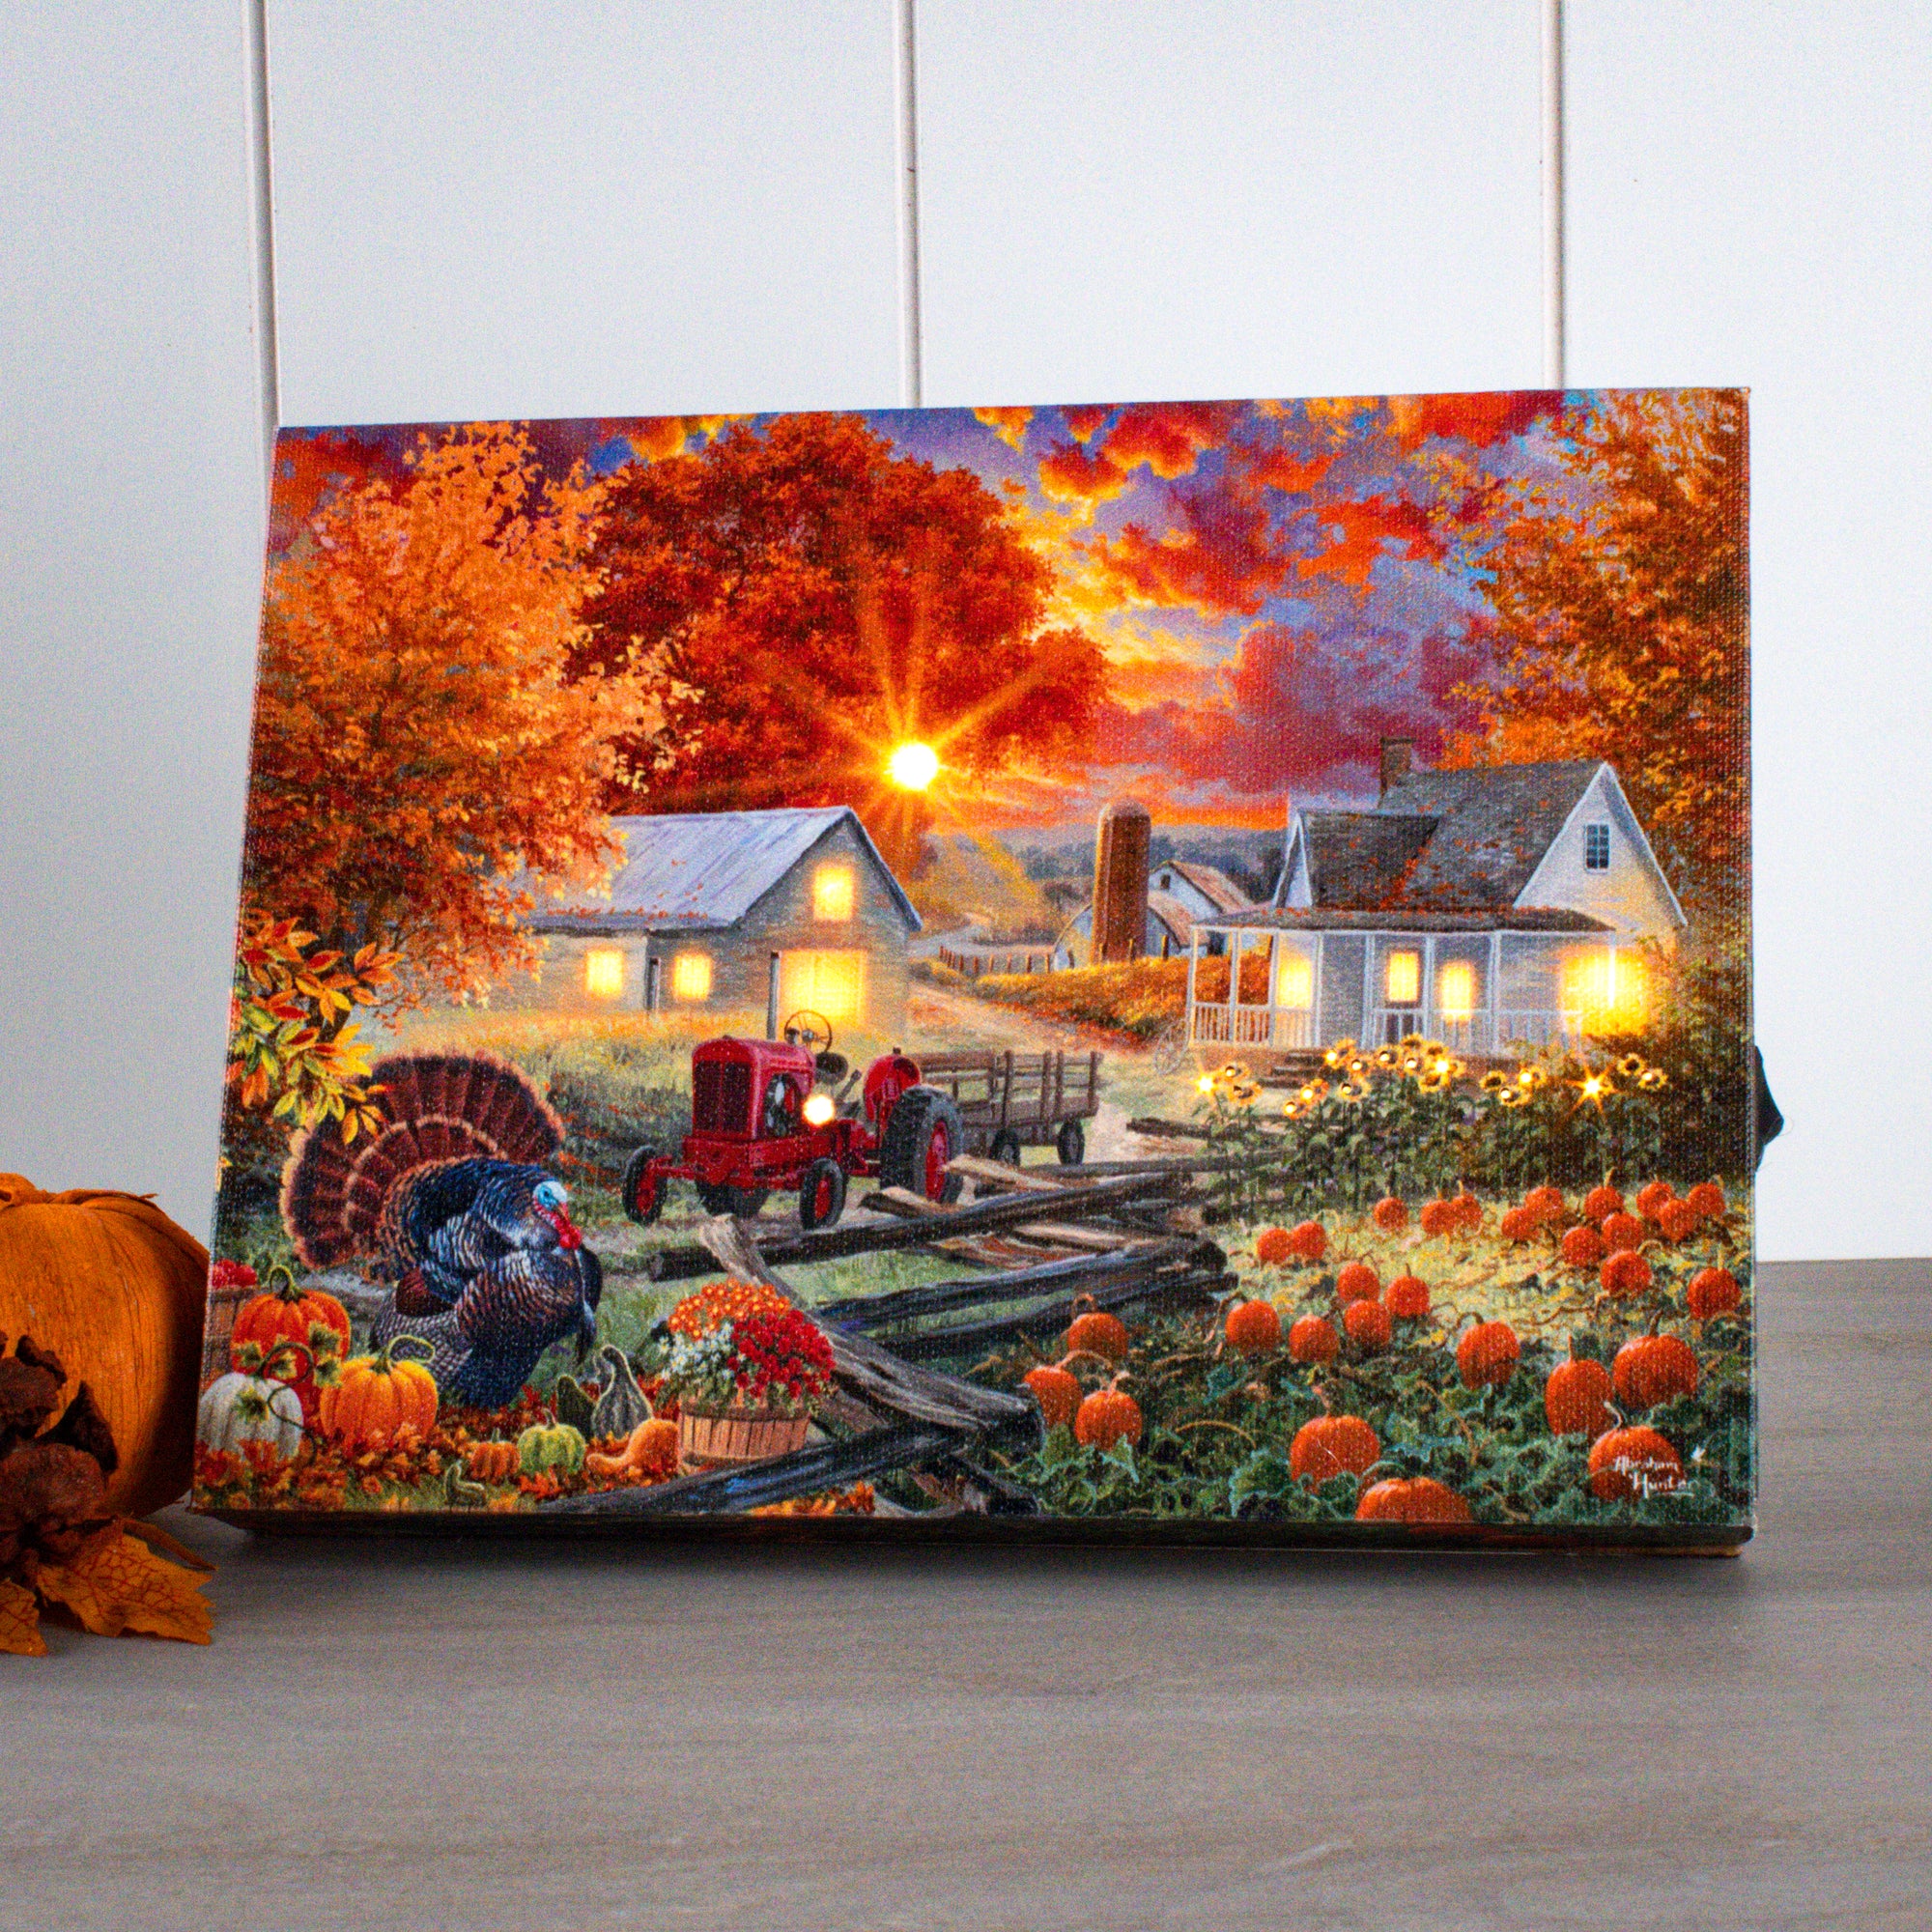 The Pumpkin Harvest 8x6 Lighted Tabletop Canvas